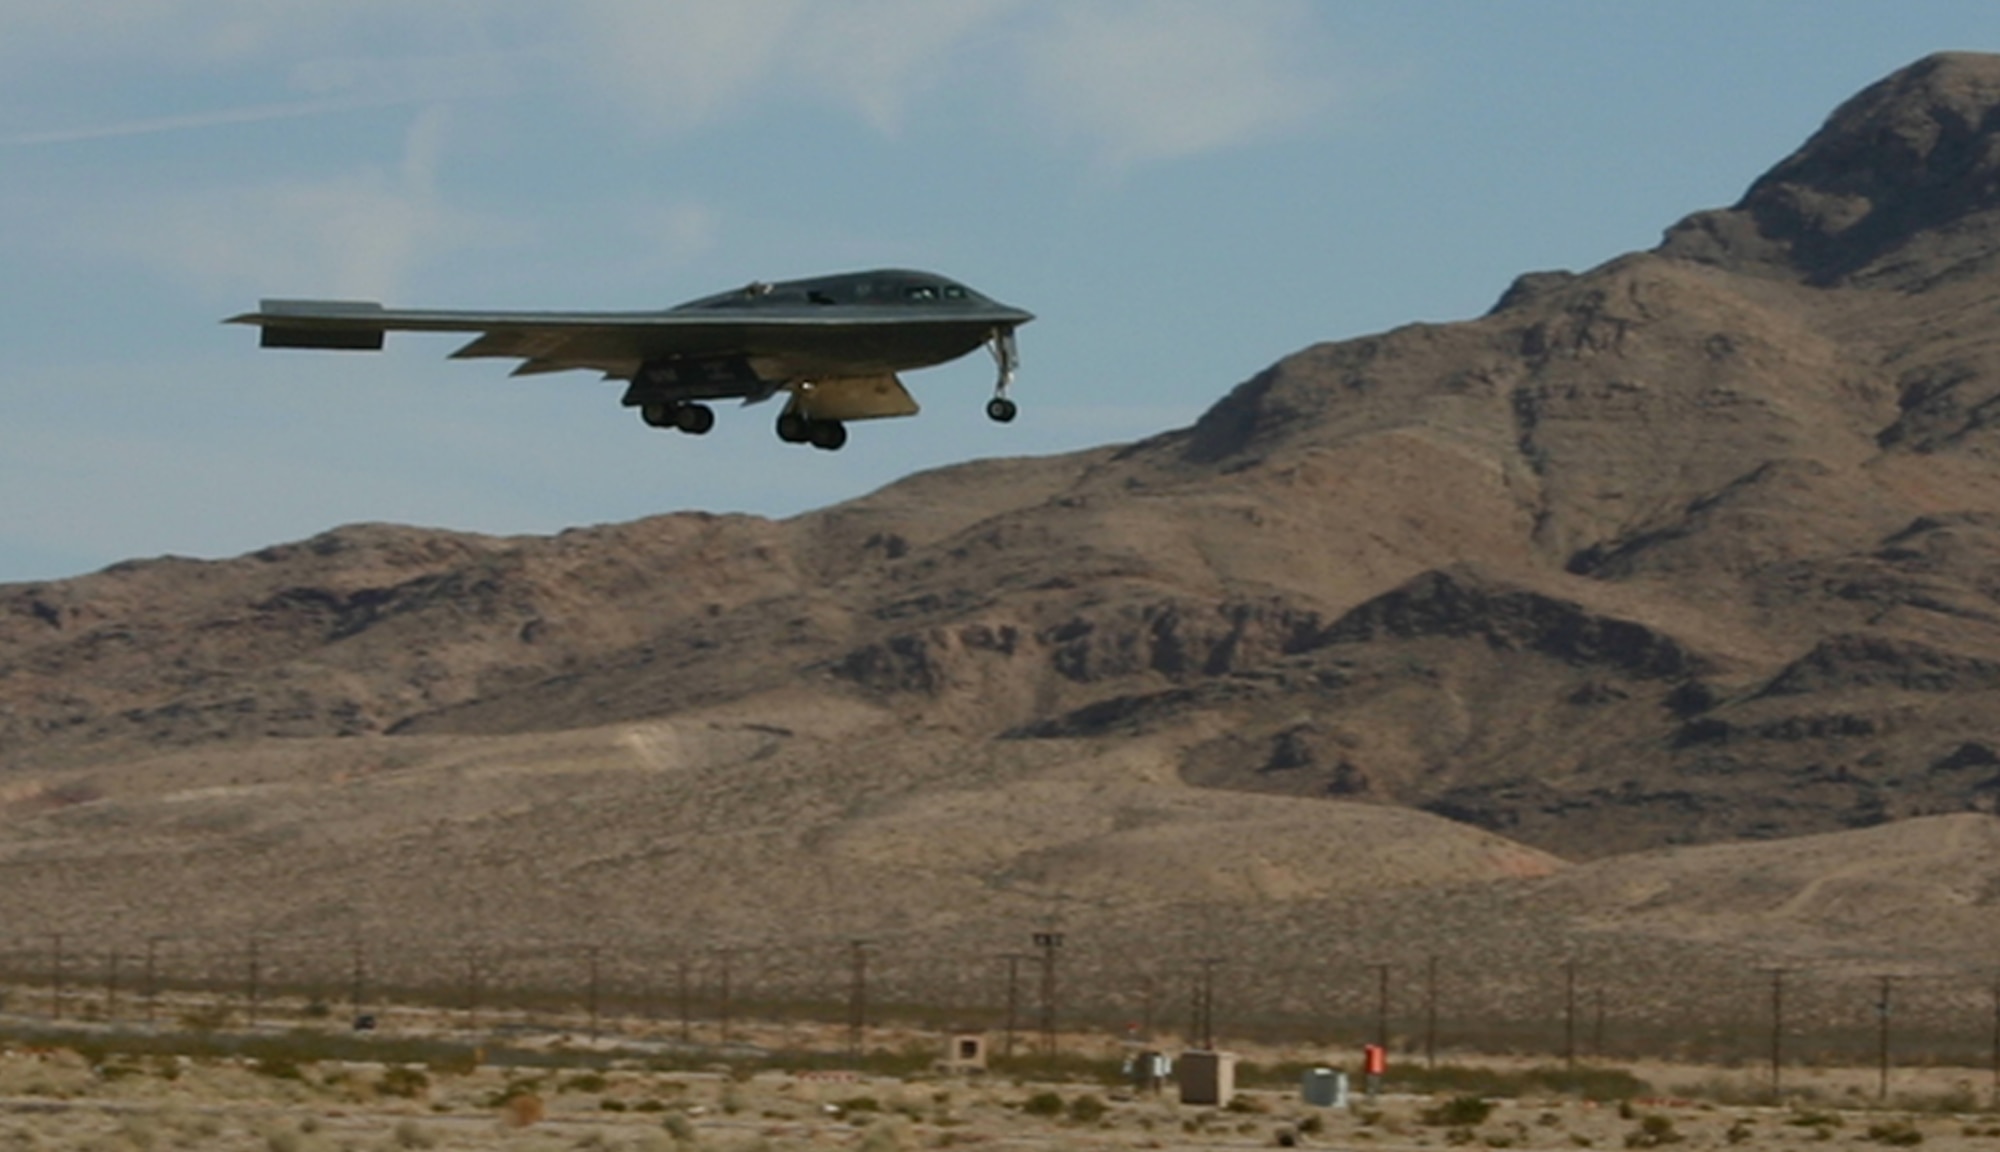 An B-2 Spirit bomber lands at Nellis Air Force Base, Nev., after a Red Flag mission Feb. 12, 2007. All three of the Air Force's stealth aircraft models -- the B-2, F-117 and F-22 -- are taking part in Red Flag, which sharpens aircrews’ war-fighting skills in realistic combat situations. Crews are flying missions during the day and night to the nearby Nevada Test and Training Range where they take part in highly realistic aerial combat. The U.S. Air Force and Navy, along with Australia and the United Kingdom, are participating in February's Red Flag.  (U.S. Air Force photo/Mike Estrada)